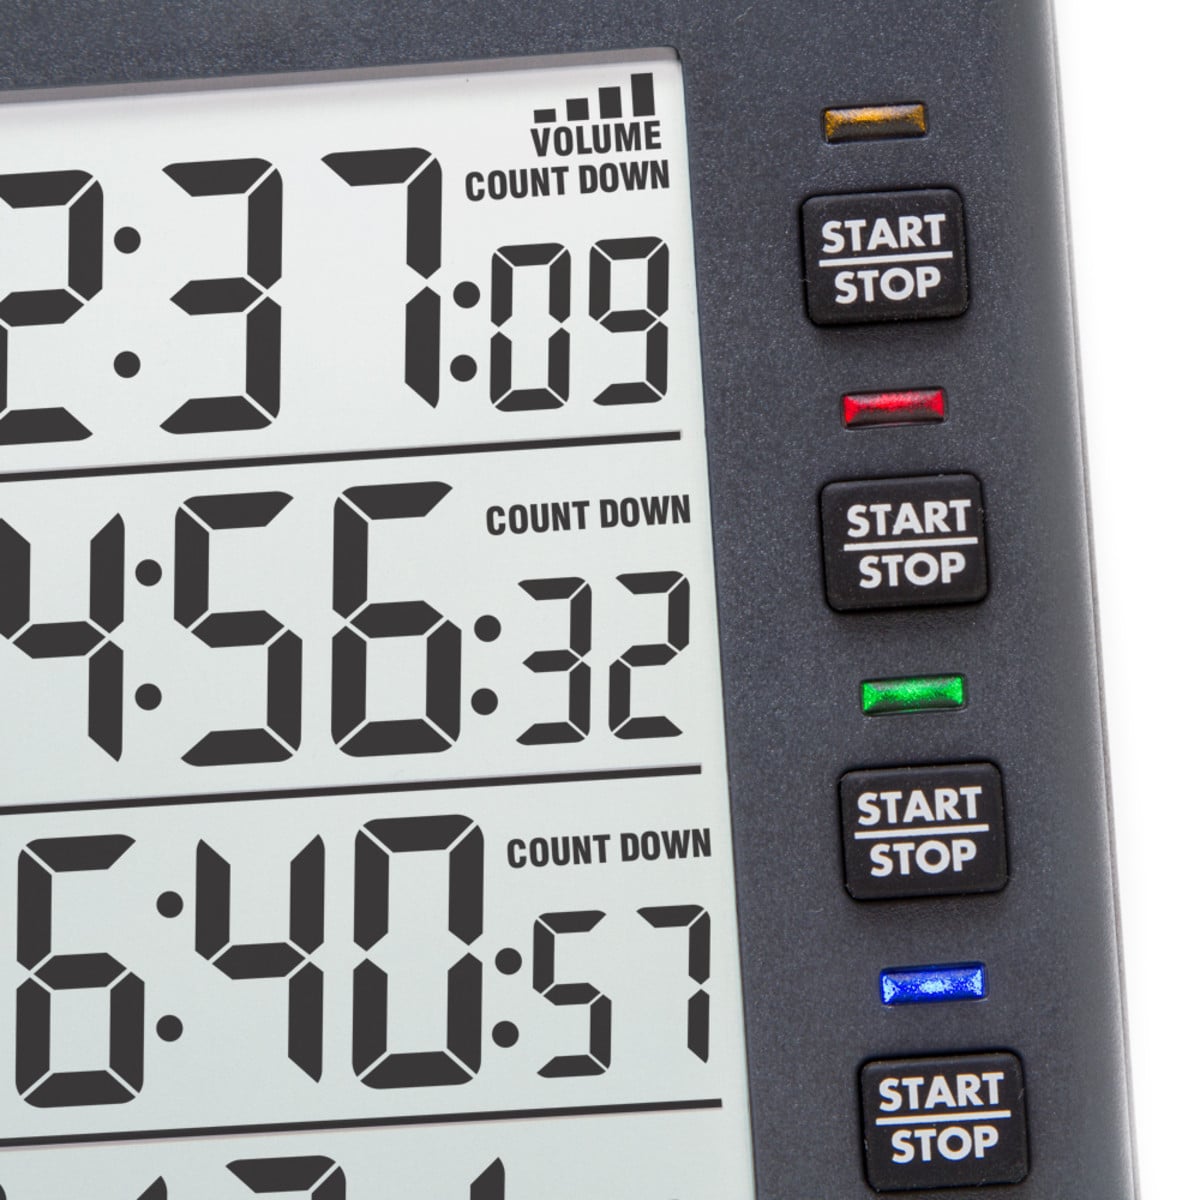 ThermoWorks: 6-Hour Flash Sale: 40% Off TimeStack Kitchen Timer